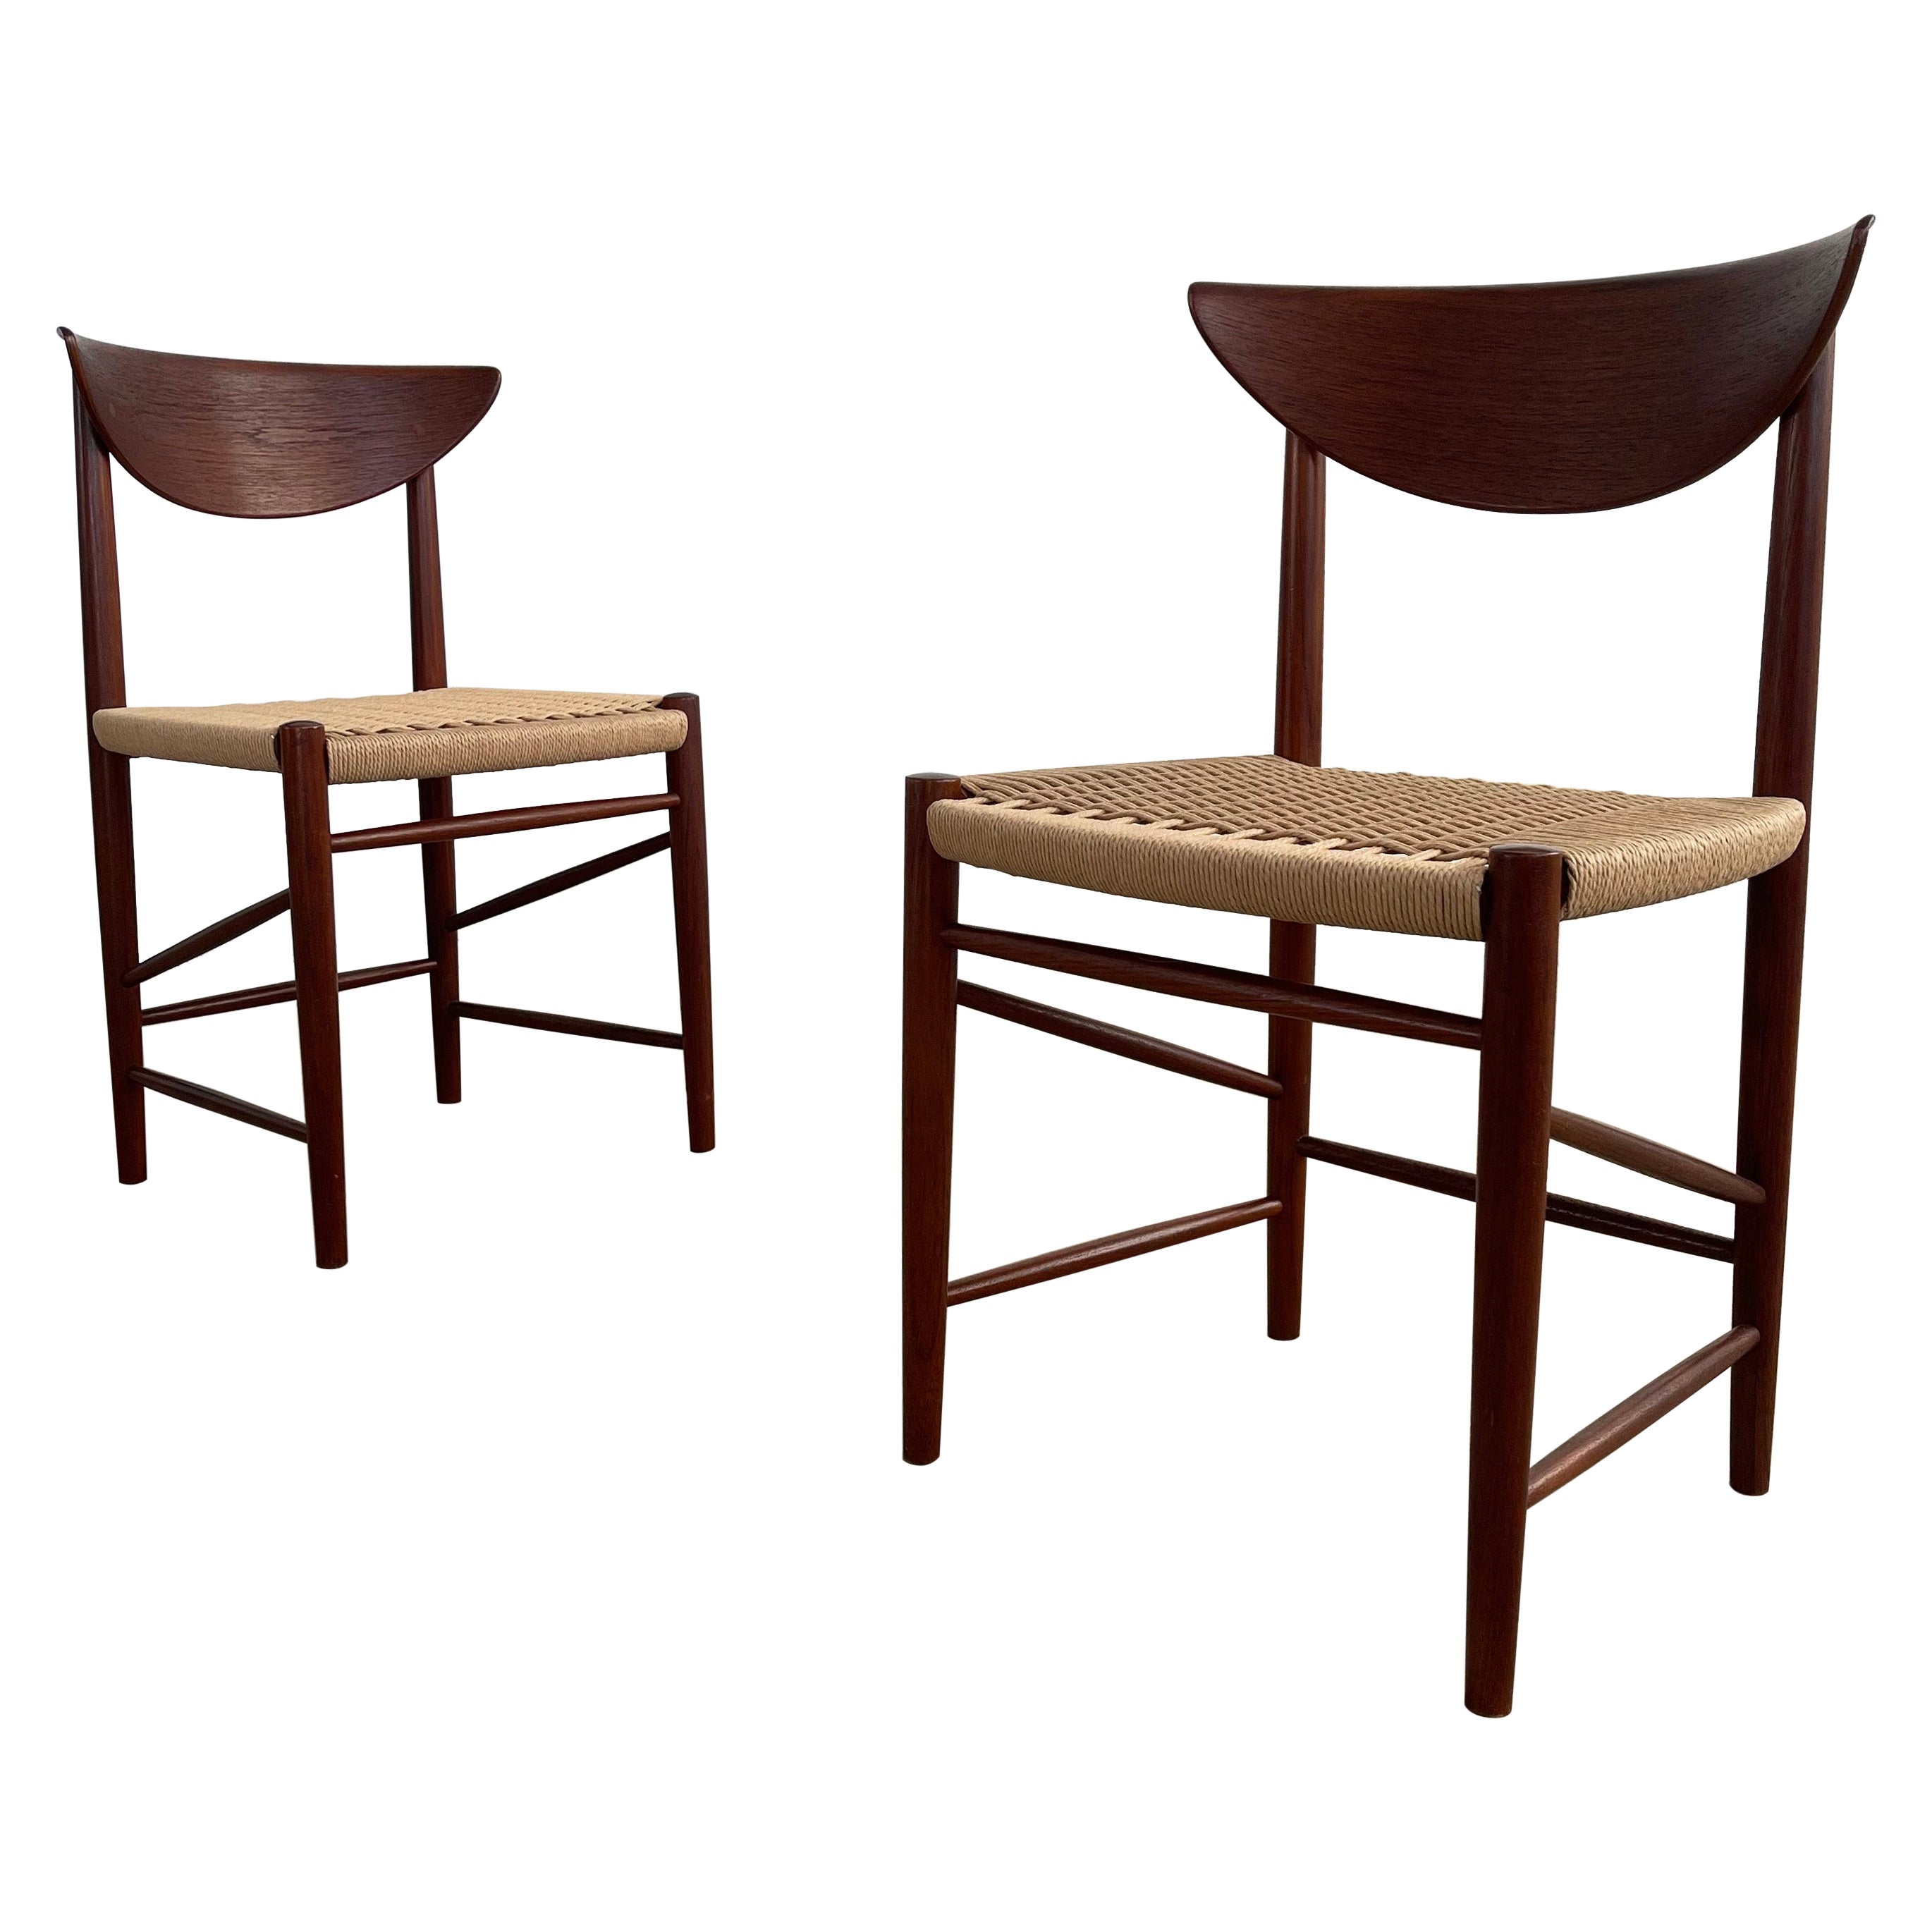 Peter Hvidt And Orla Molgaard Nielsen Teak And Rope Model 316 Chairs For Sale